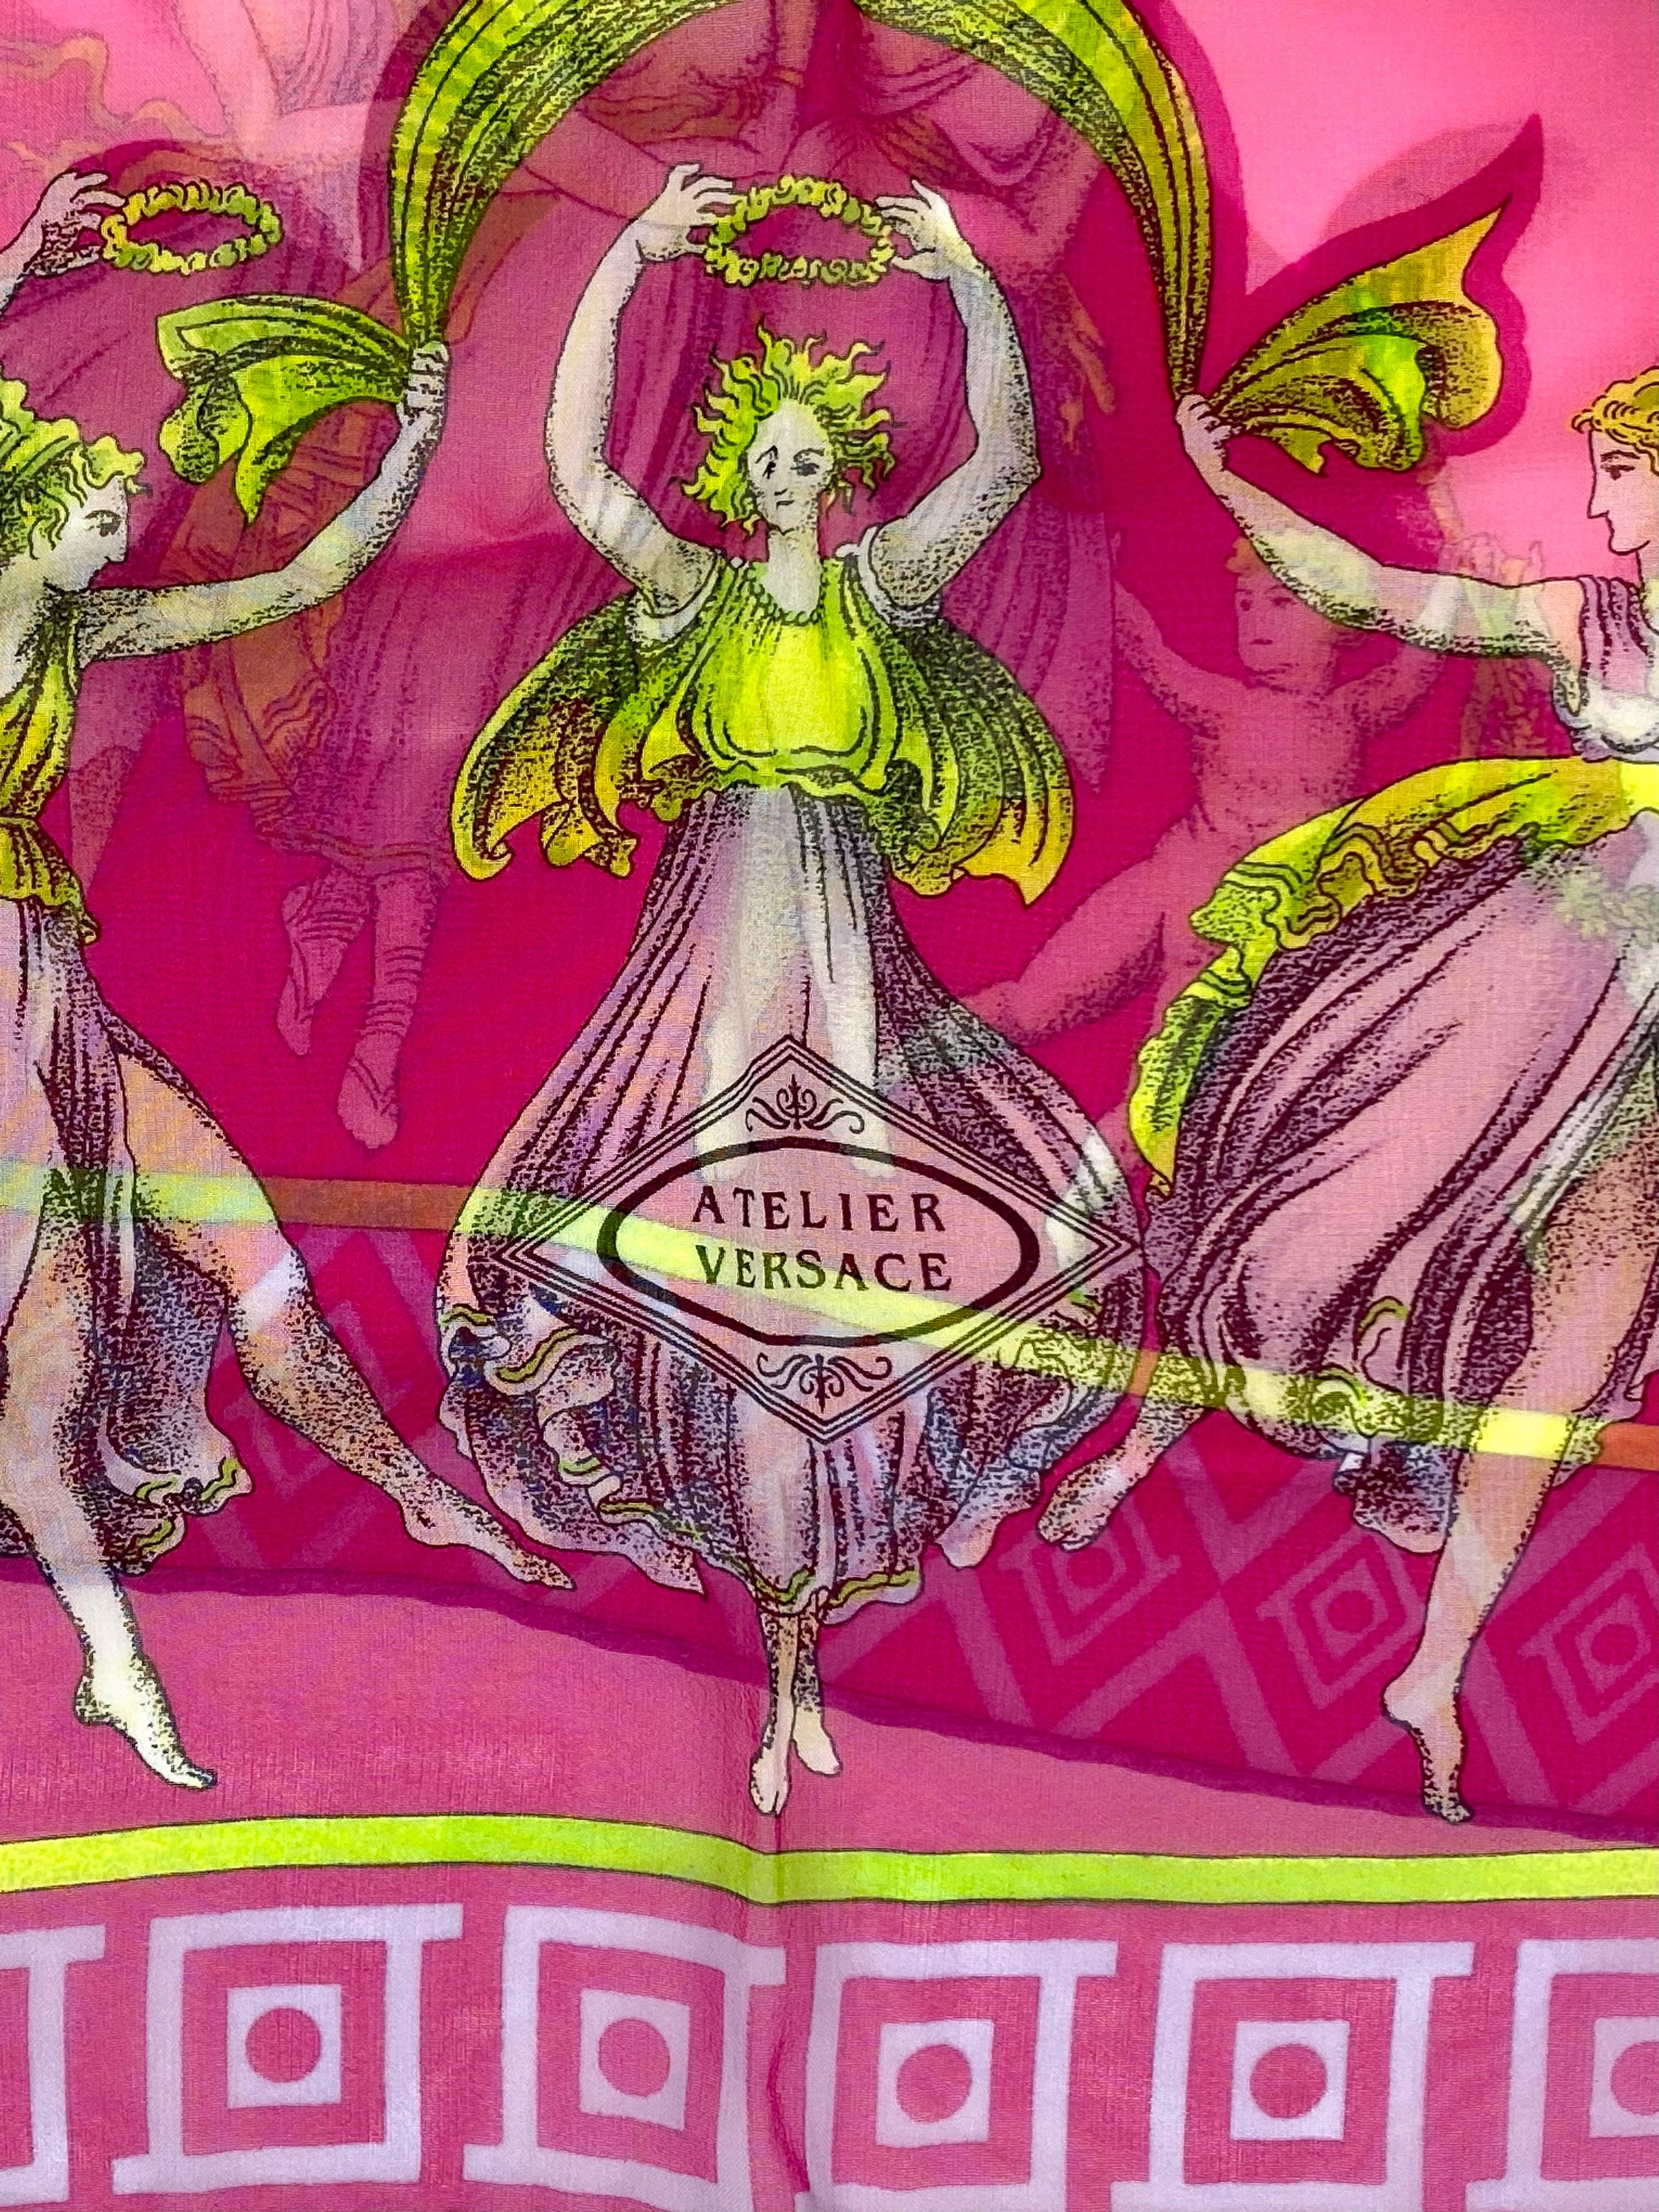 Presenting a bright pink and green sheer Atelier Versace scarf, designed by Gianni Versace. This gorgeous 'Amore and Desire' scarf is from Gianni Versace's 'haute couture' collection and features ancient Greek/Roman sculpture scenes and motifs. This